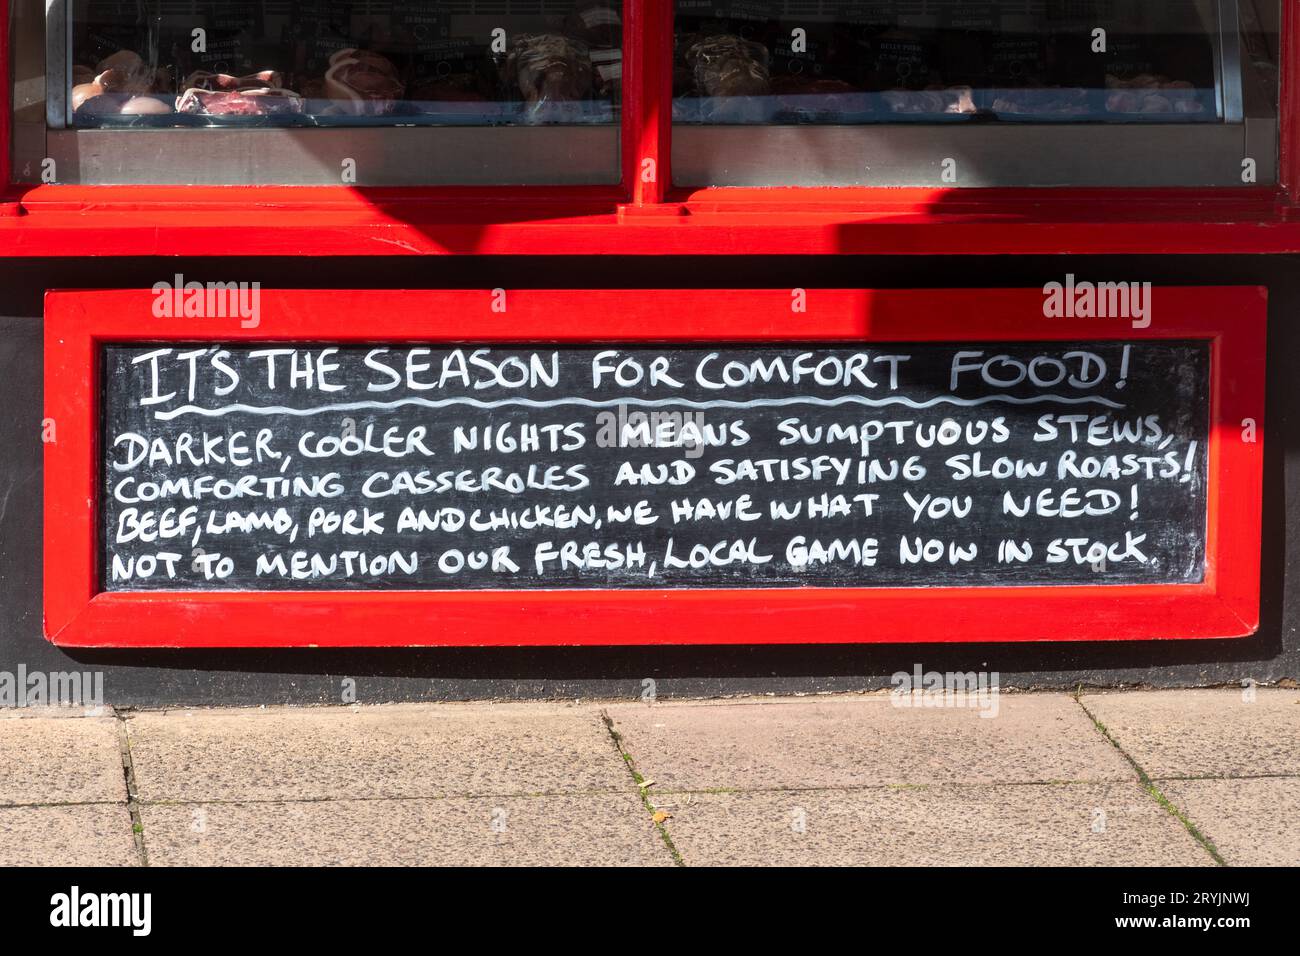 Sign in butchers shop 'Its the season for comfort food' promoting stews, casseroles, roasts, meats for cooler weather in autumn, England, UK Stock Photo